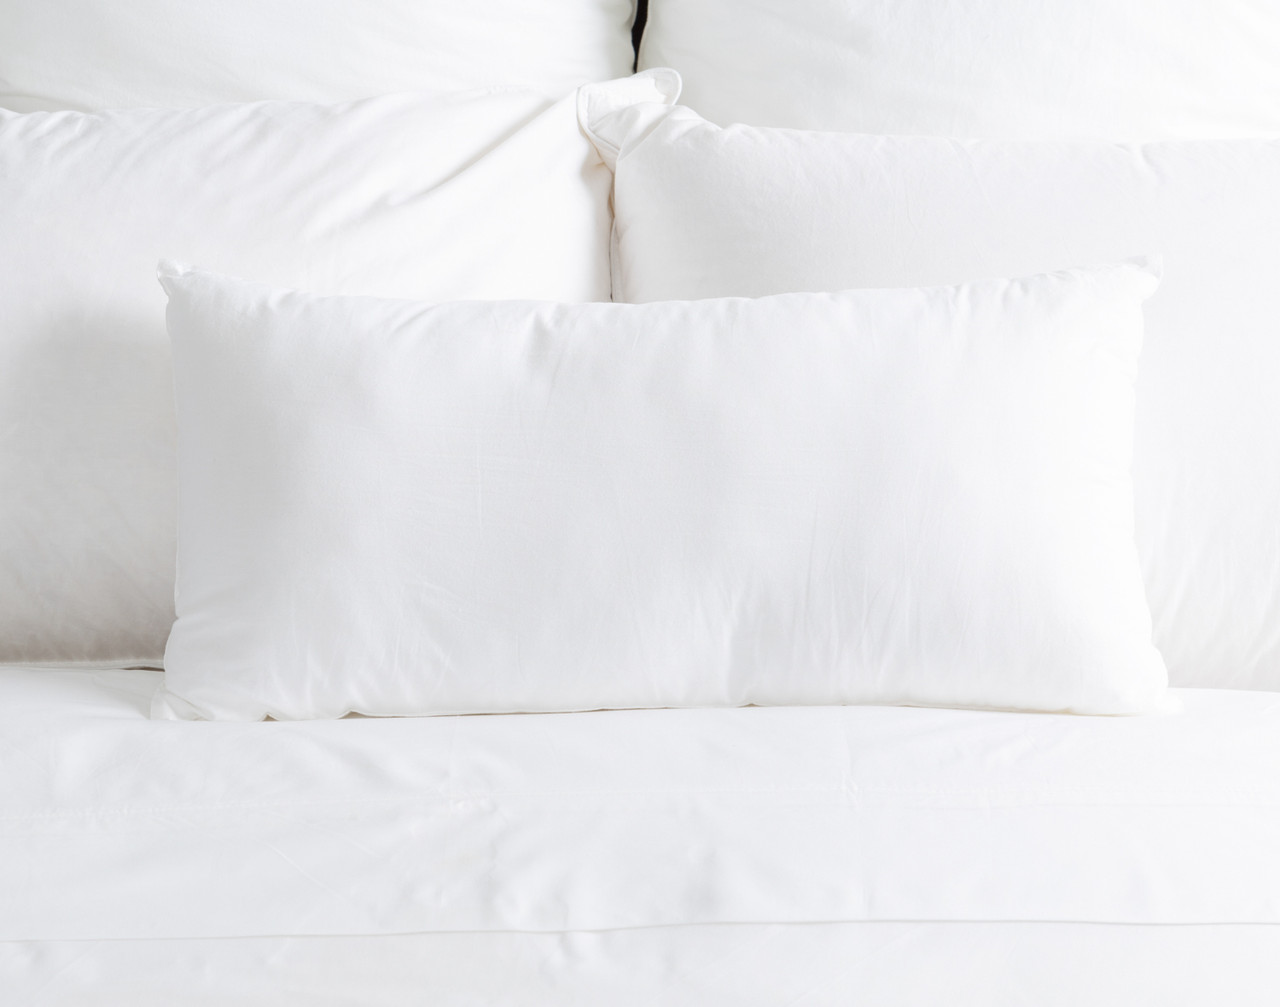 Boudoir Pillow Insert sitting on a solid white bed.